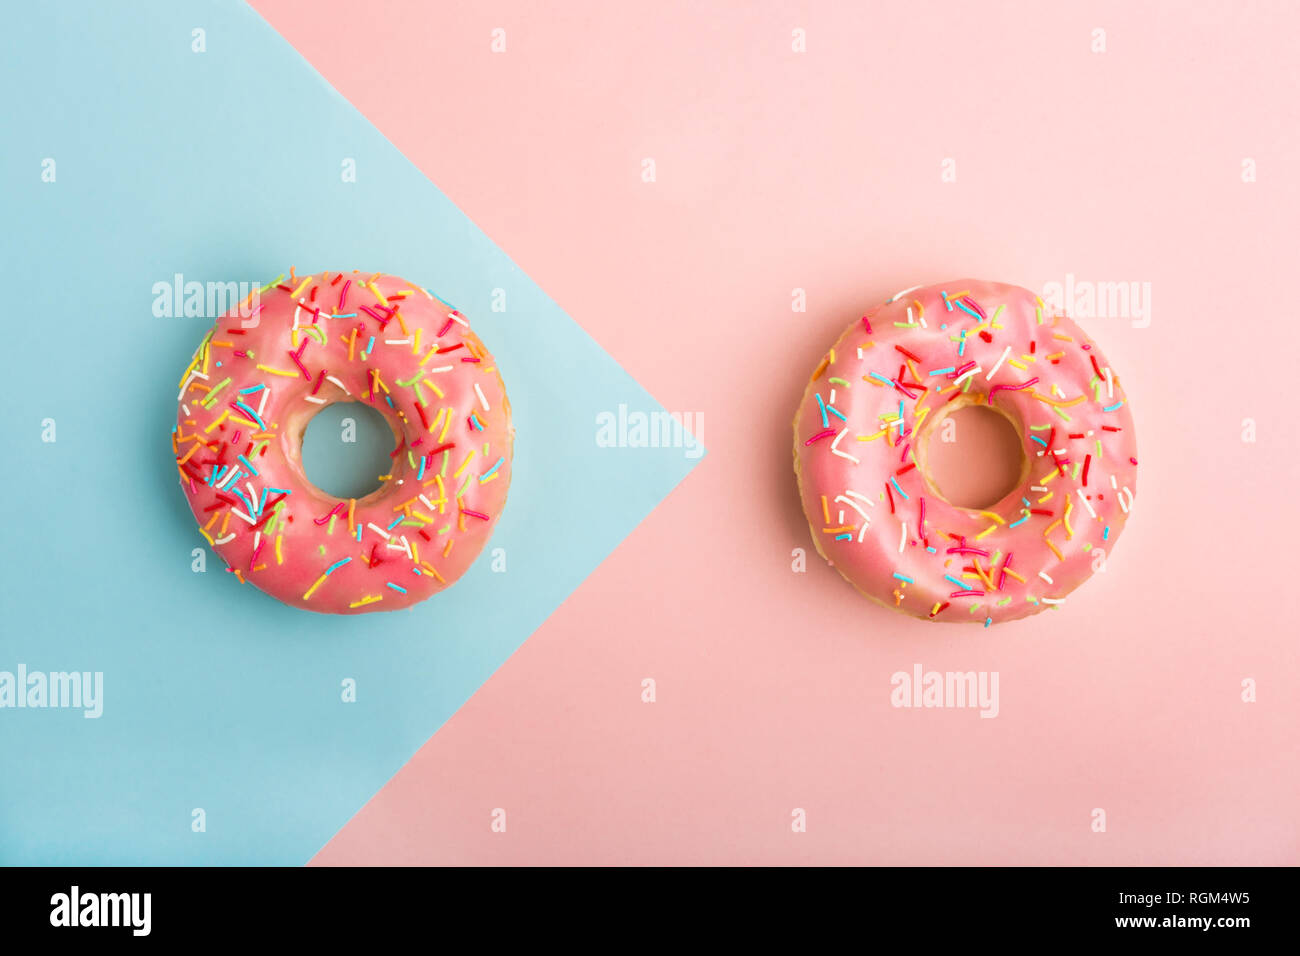 Two donuts decorated with sprinkles on colorful background. Coral and blue color background Stock Photo